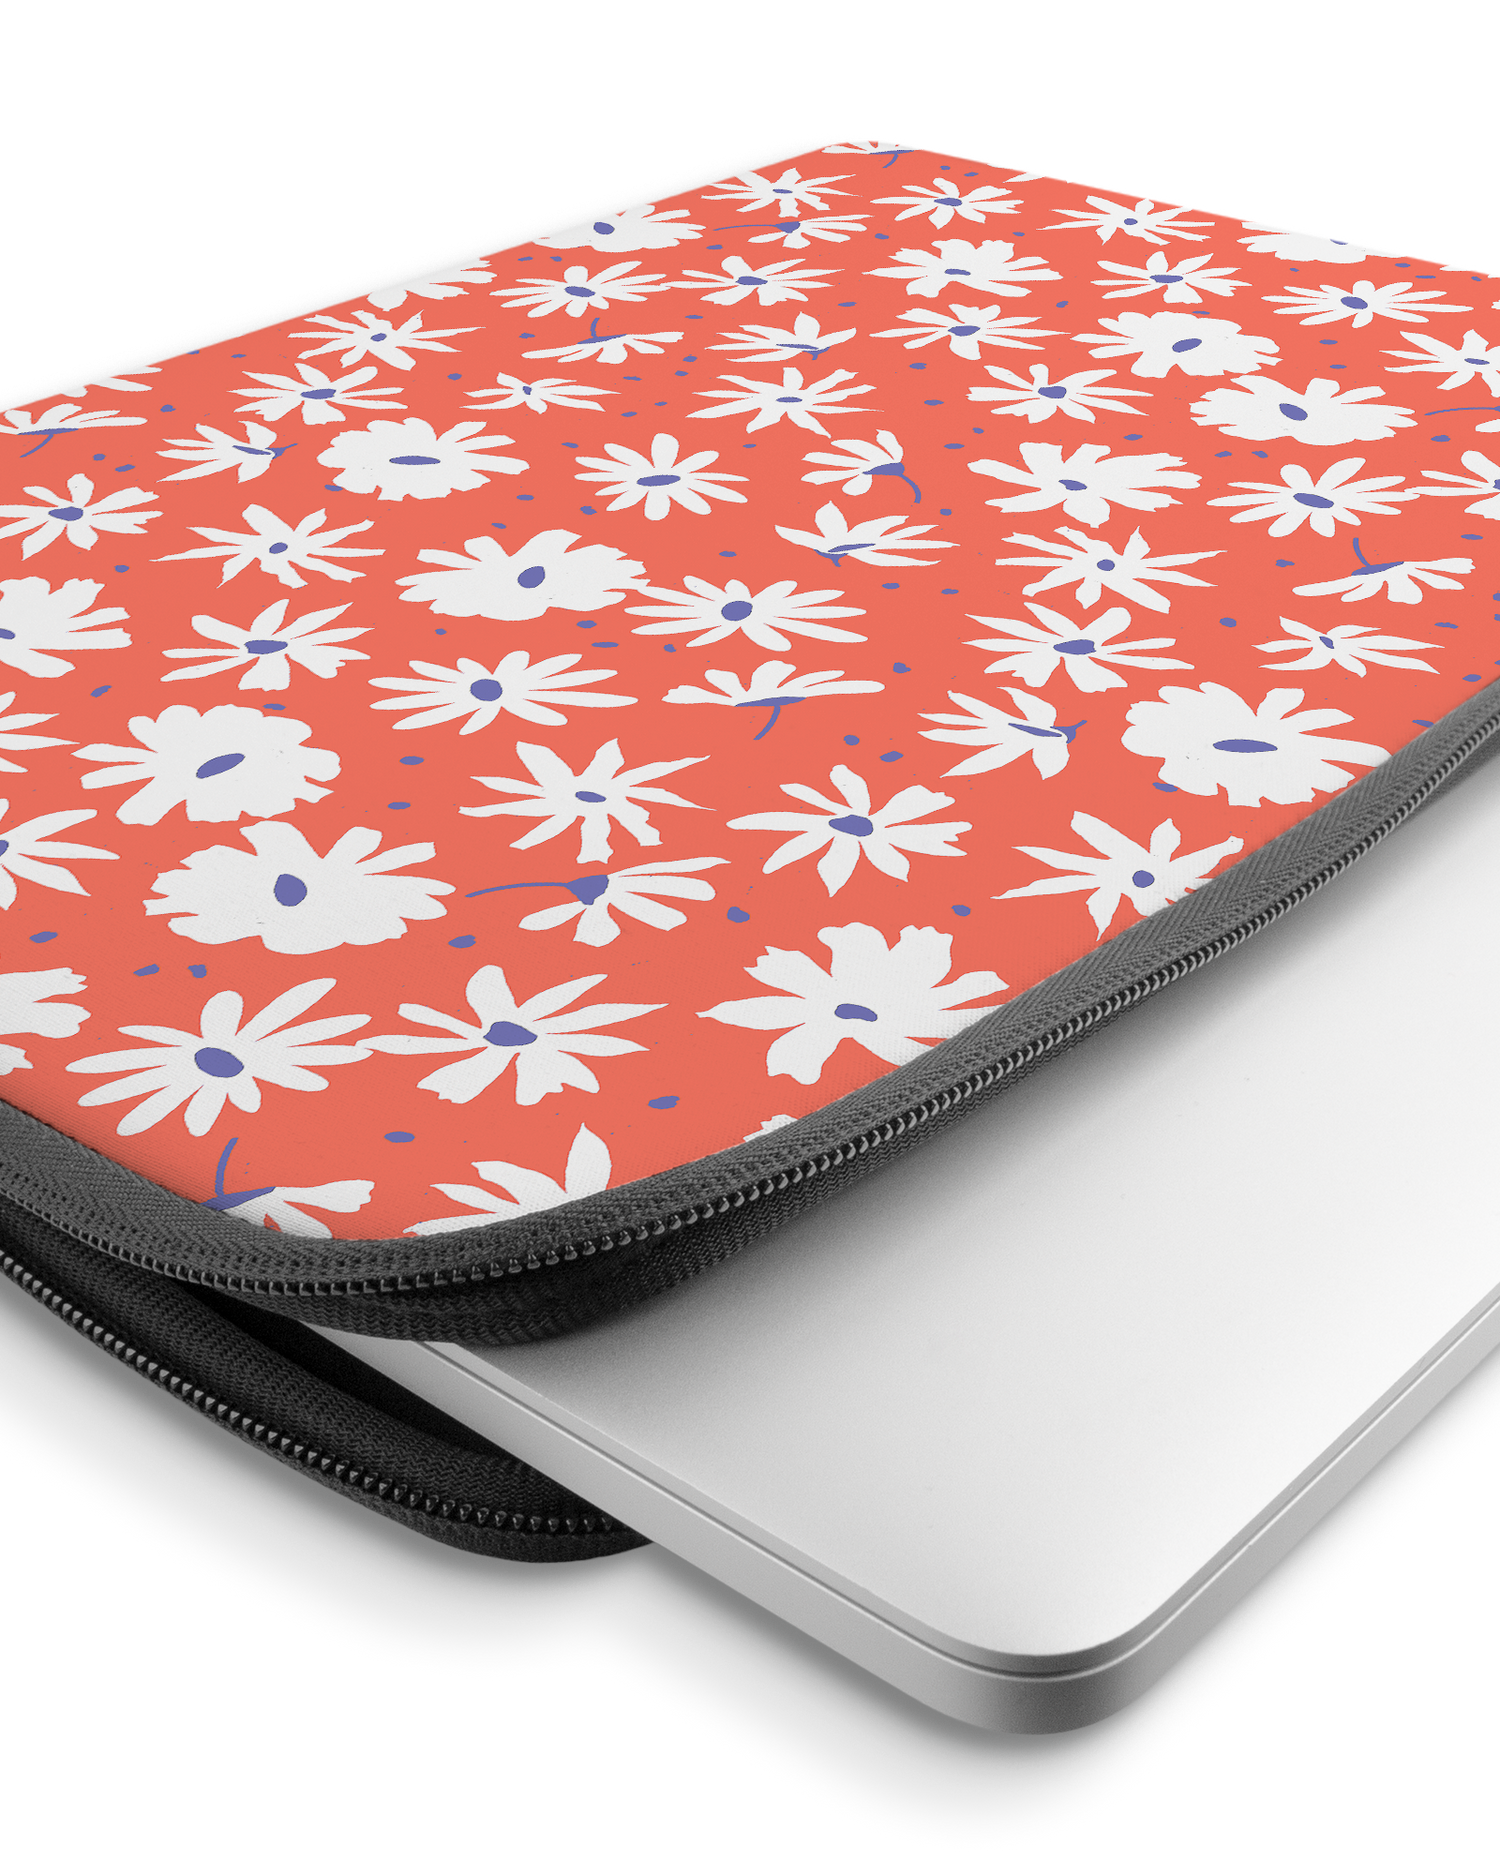 Retro Daisy Laptop Case 15-16 inch with device inside